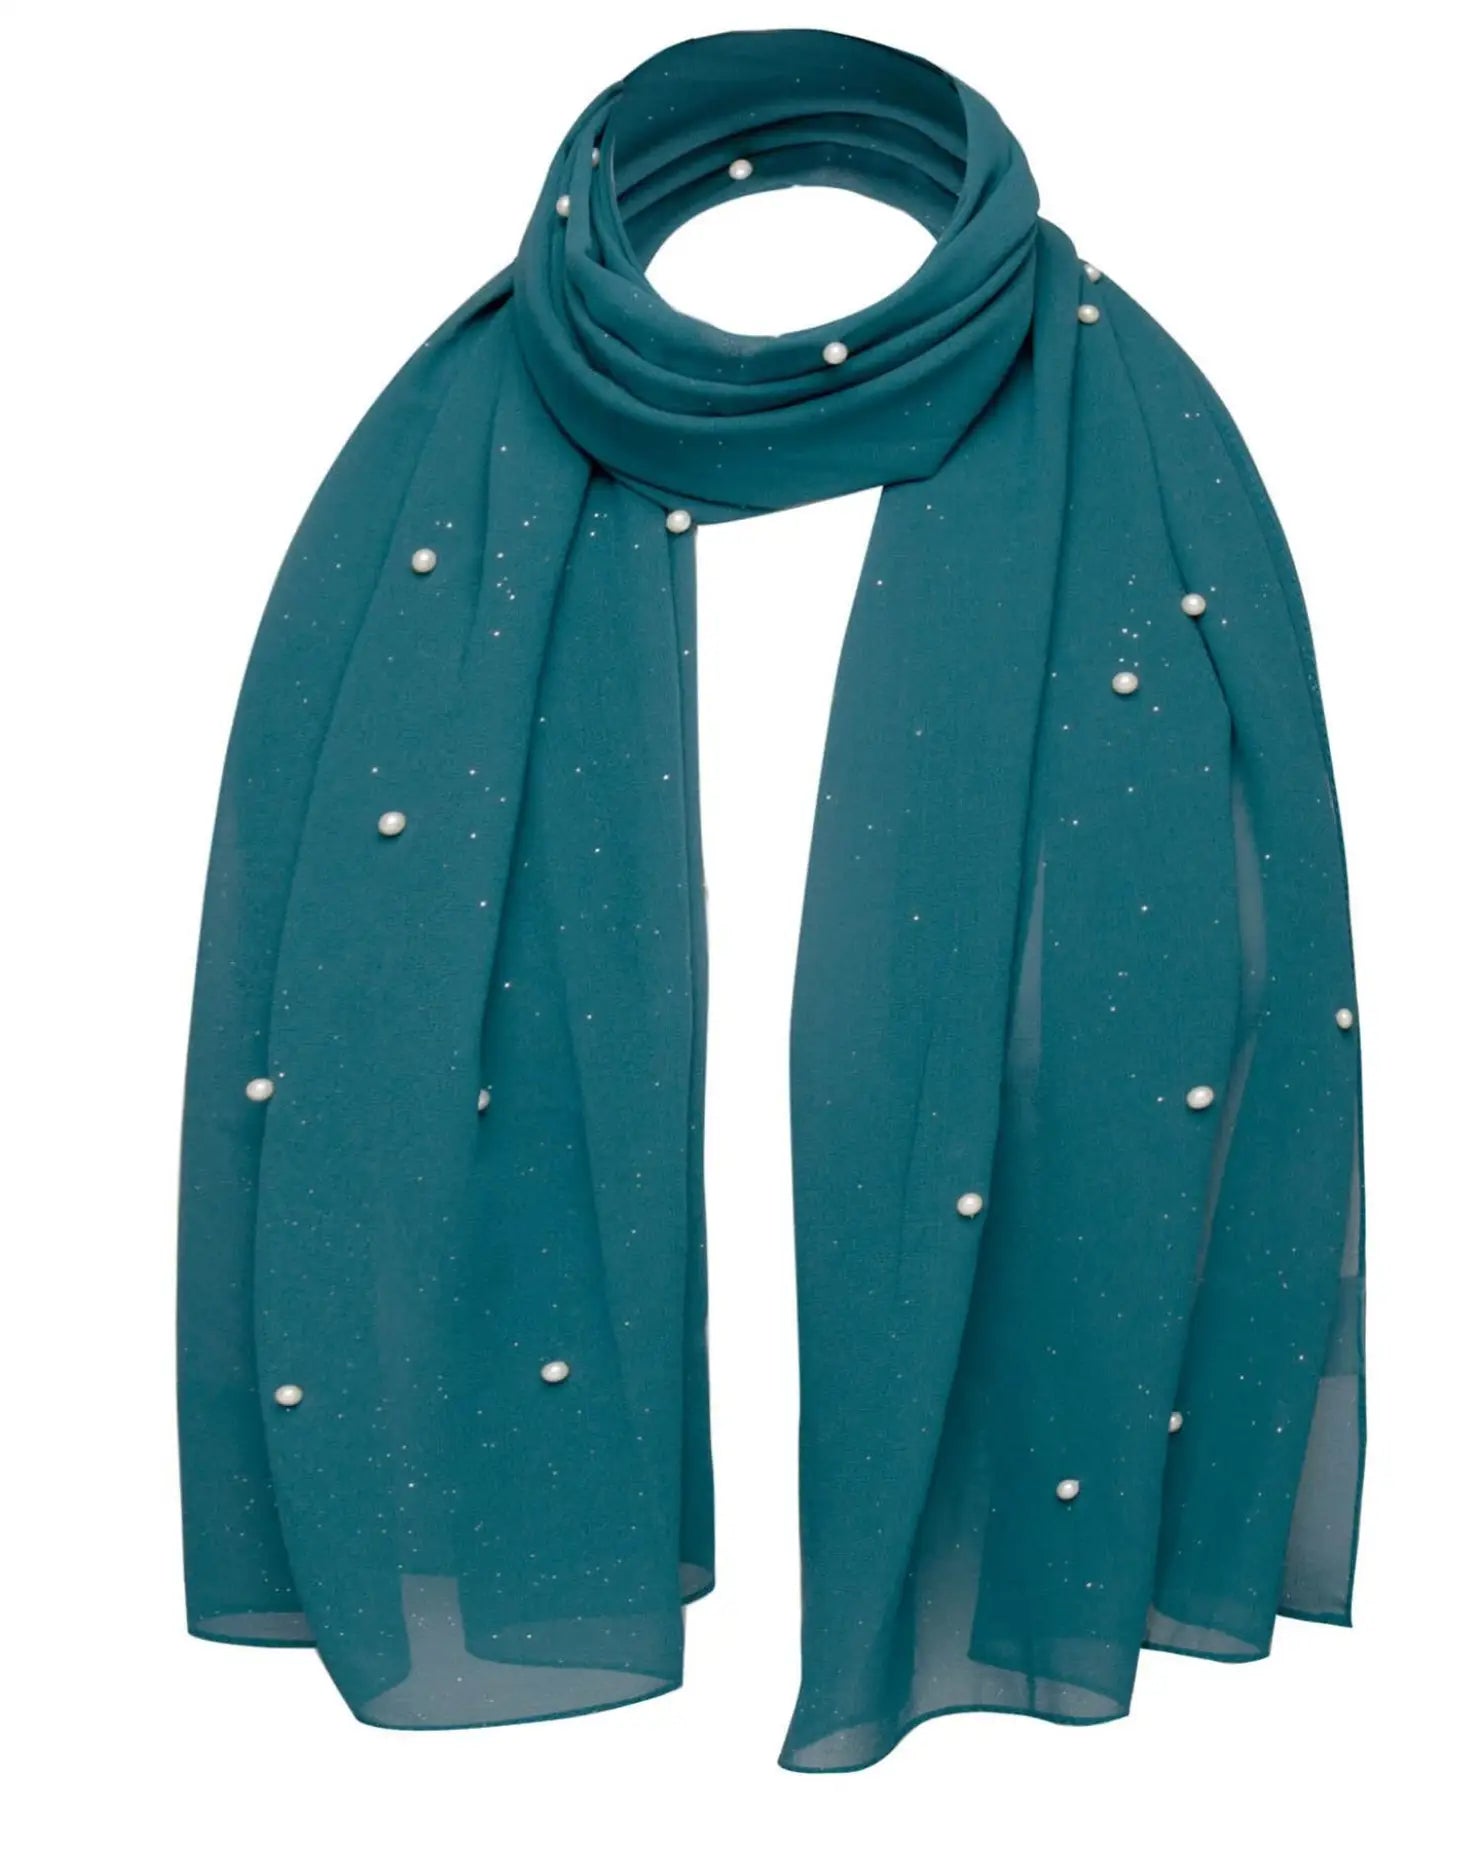 Teal green chiffon scarf with pearls - Pearl Chiffon Scarf with Durable Pearl Attachments